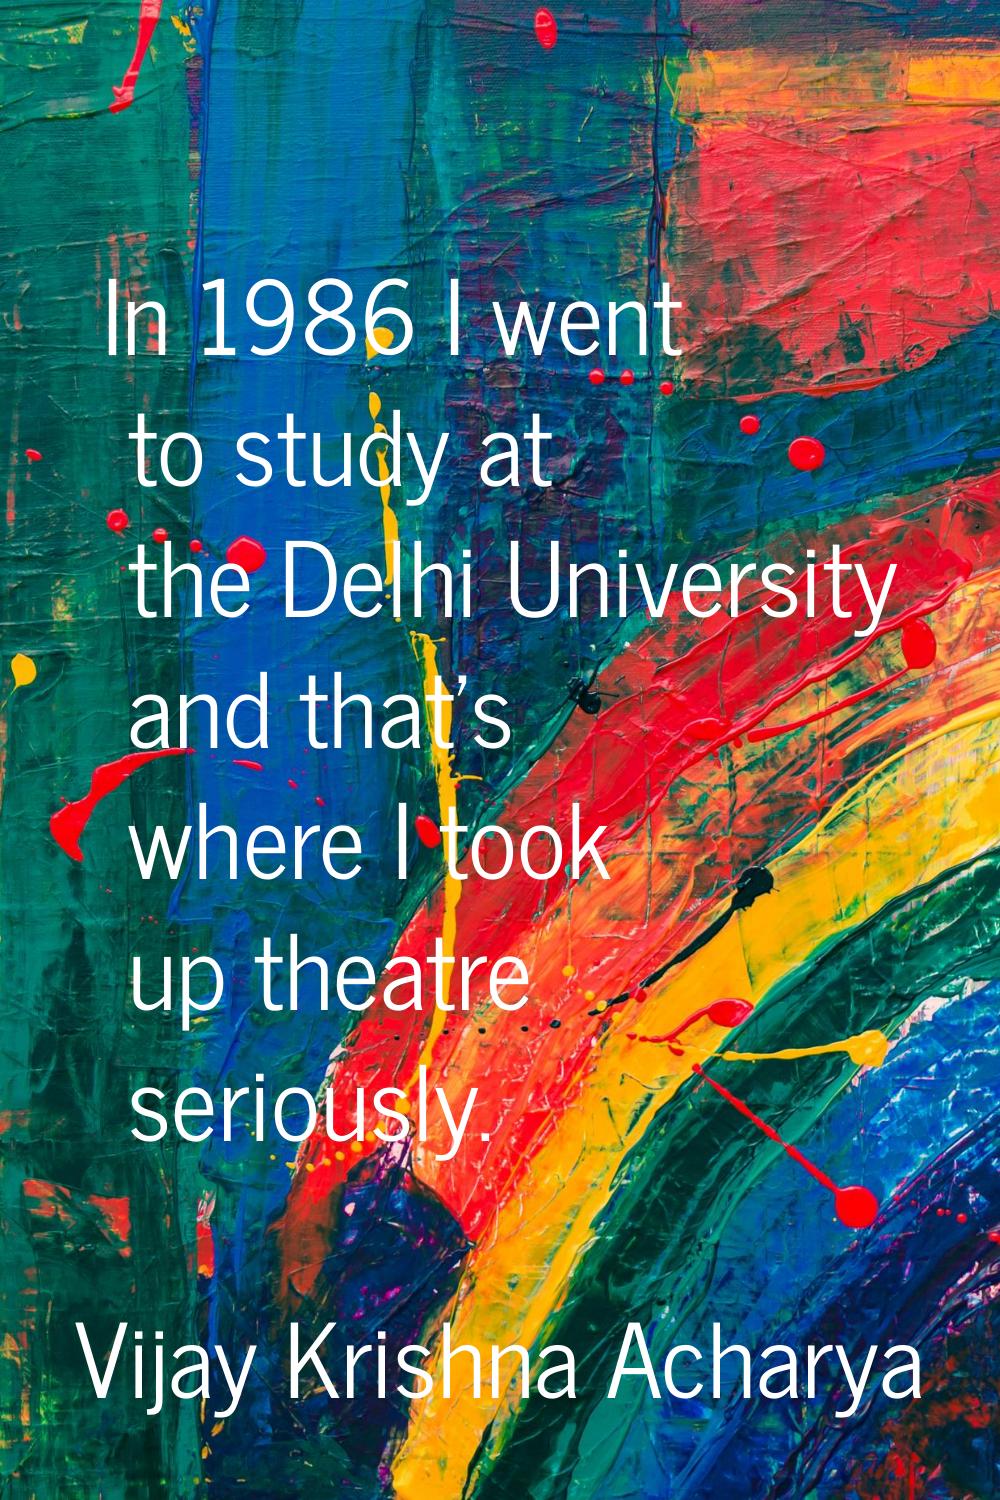 In 1986 I went to study at the Delhi University and that's where I took up theatre seriously.